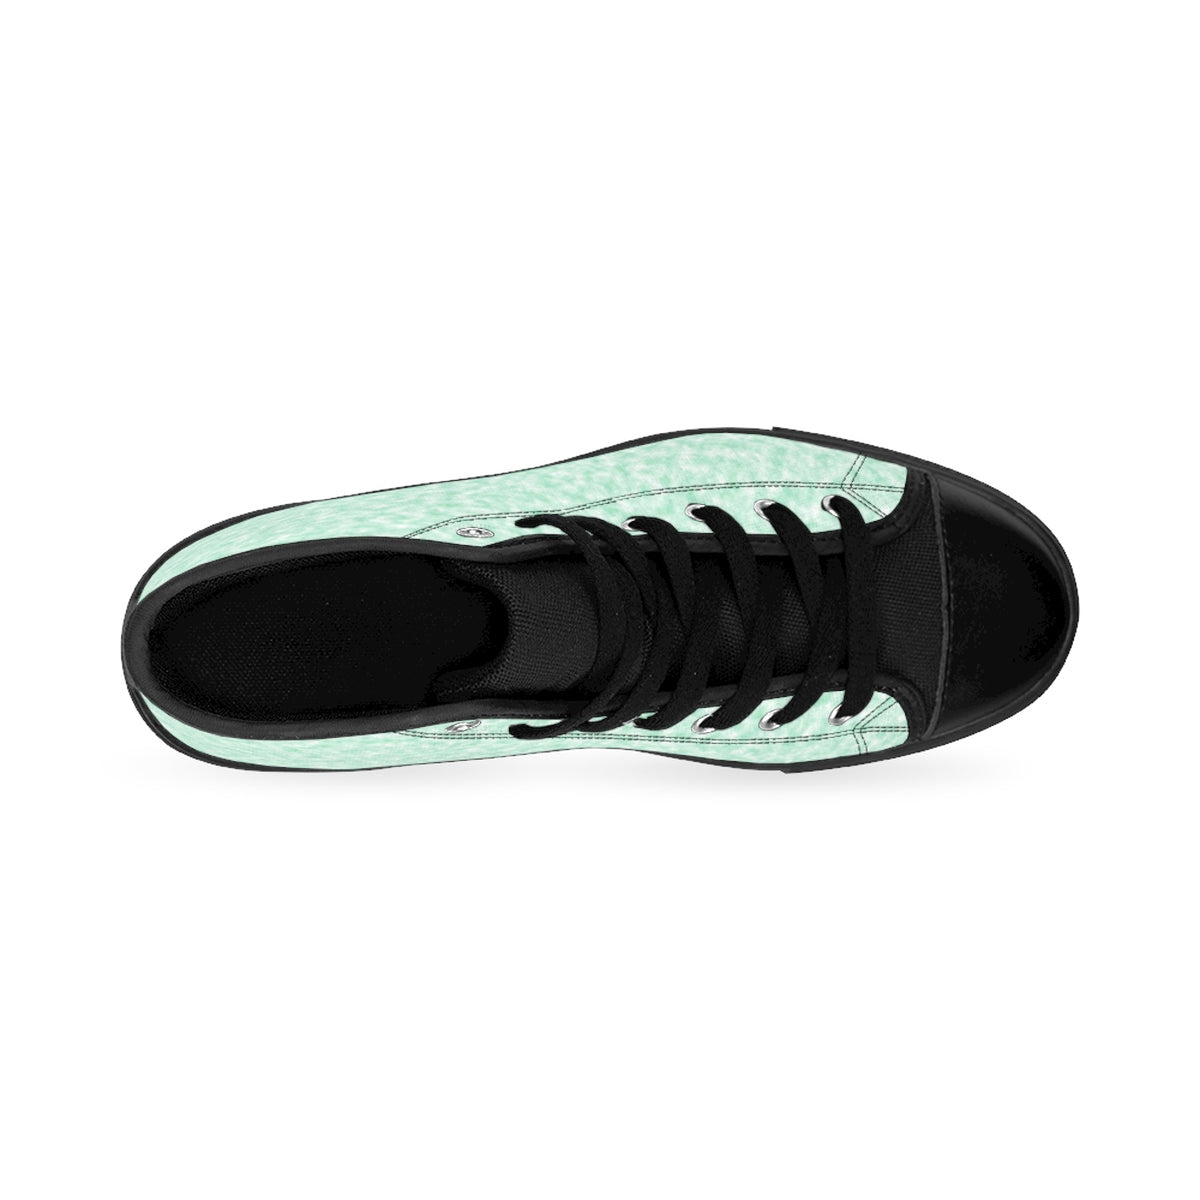 Seafoam Green and White Clouds Women's High-top Sneakers